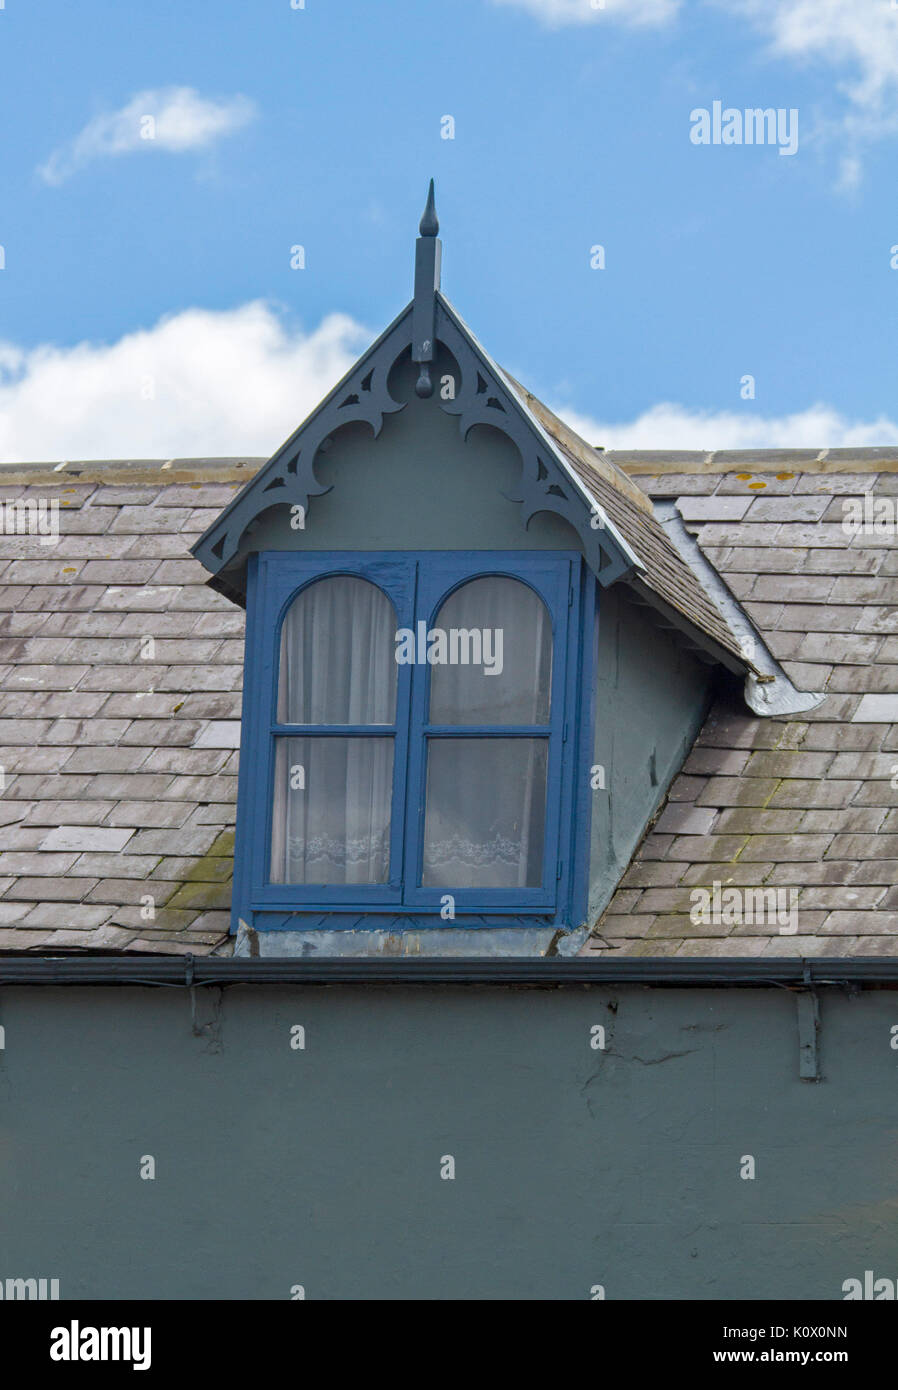 Dormer window with blue painted frame in slate roof of English house against blue sky Stock Photo